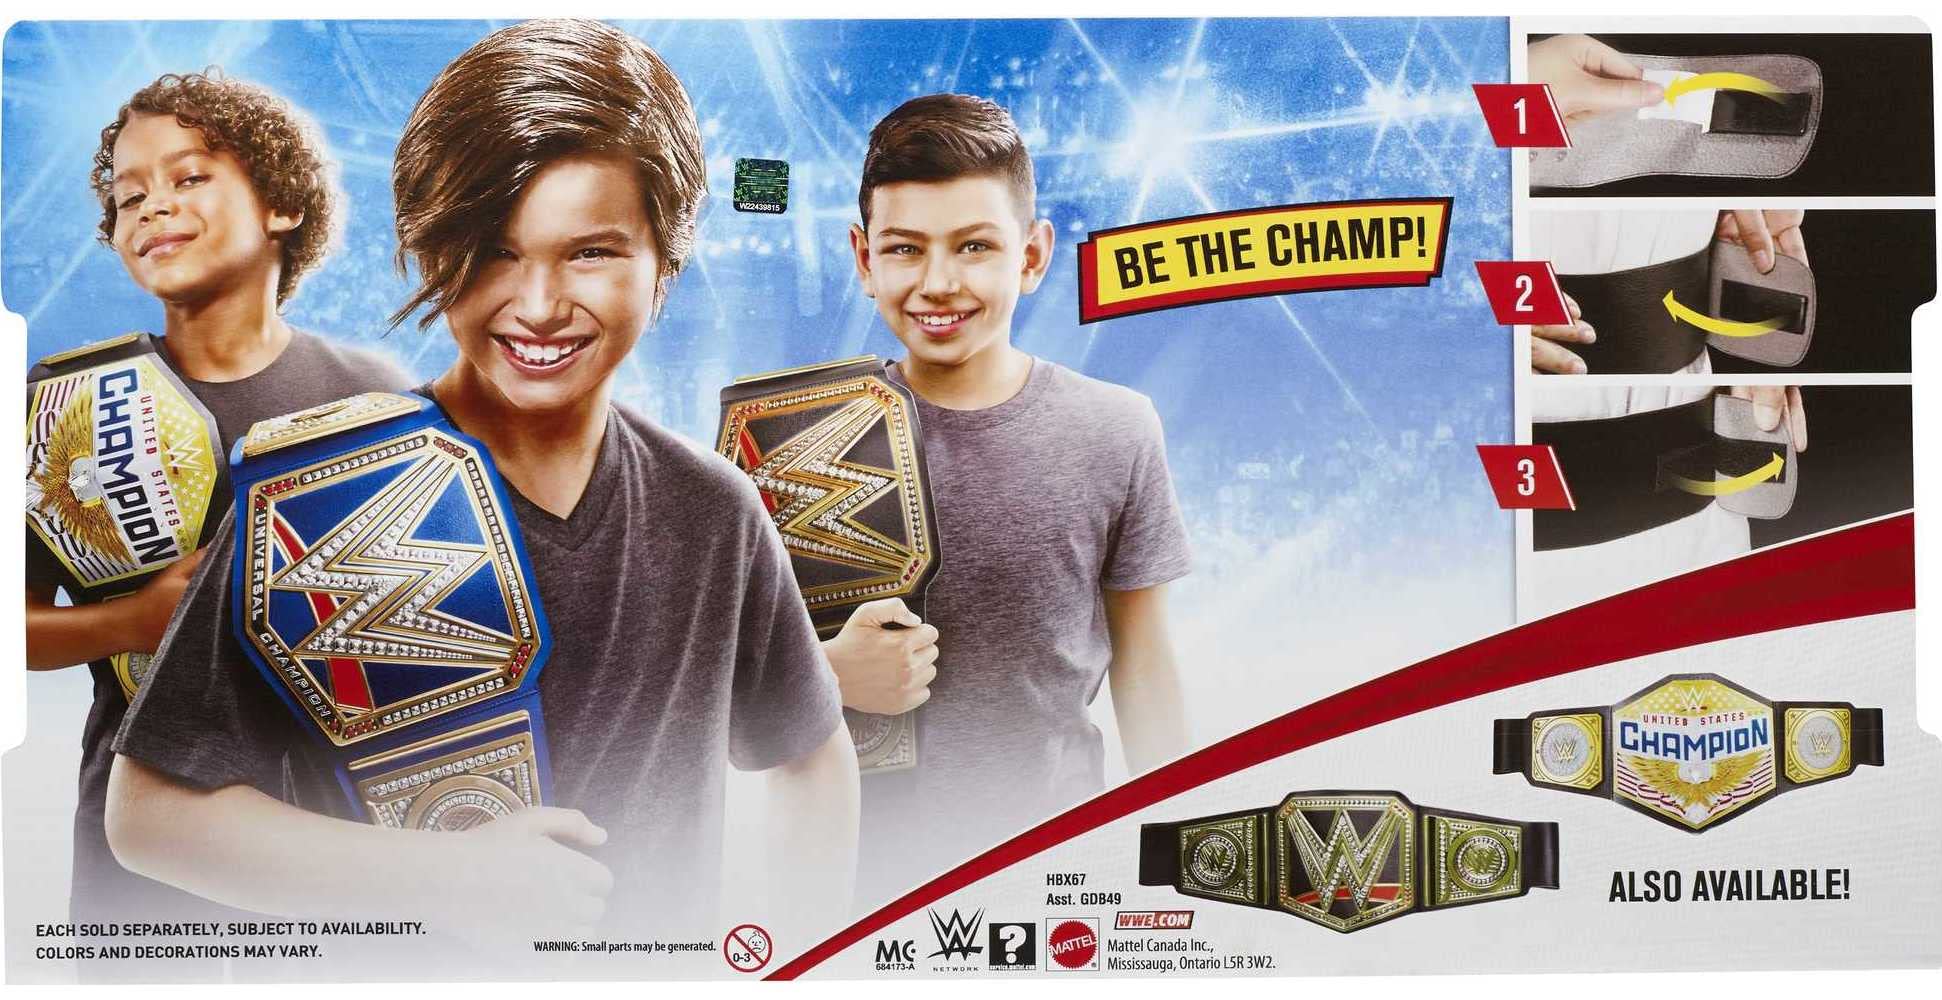 Mattel WWE Universal Championship Role Play Title Belt with Metallic Sideplates and Adjustable Strap for Kids, Blue/Gold